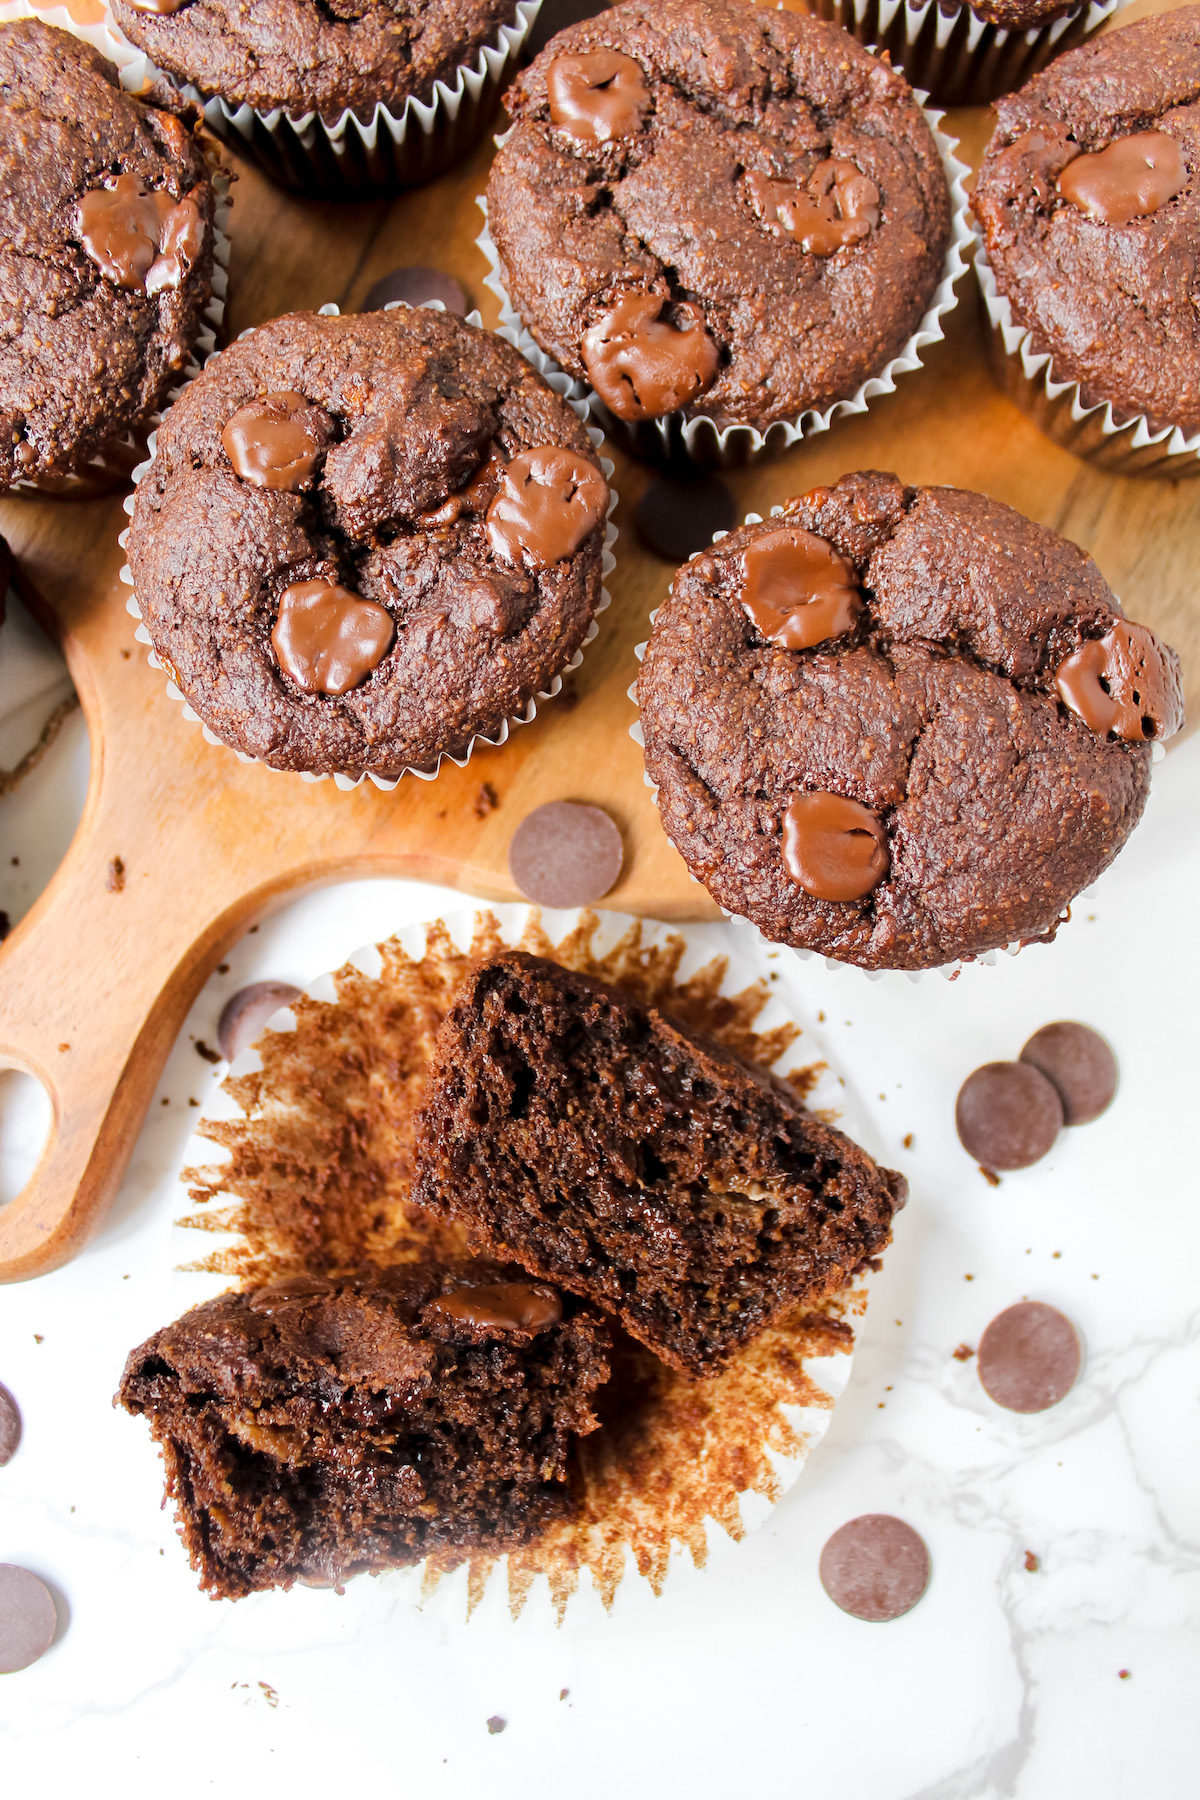 chocolate muffin split in half and whole muffins on a wooden board